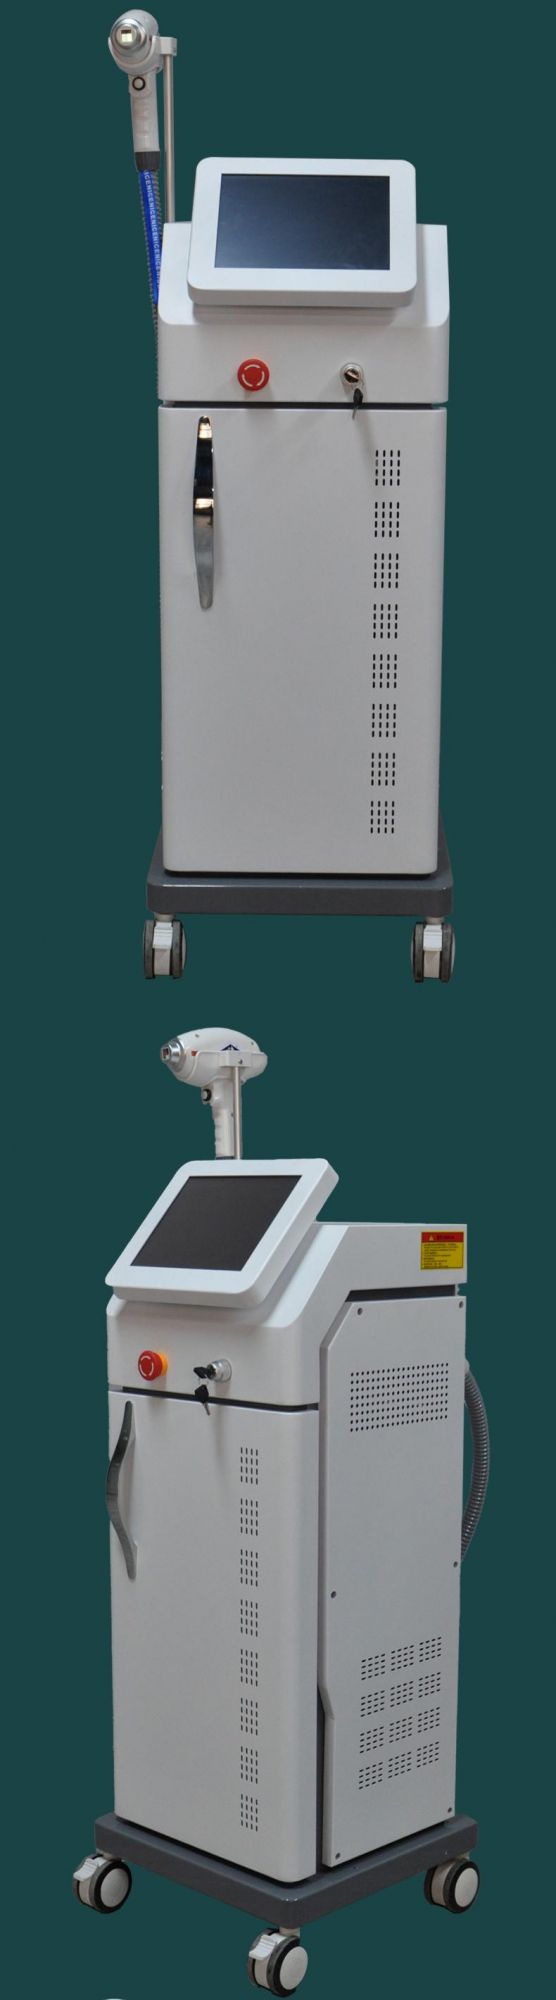 New Technology Medical 808 Diode Laser Horizontal Cosmetic Beauty Machine